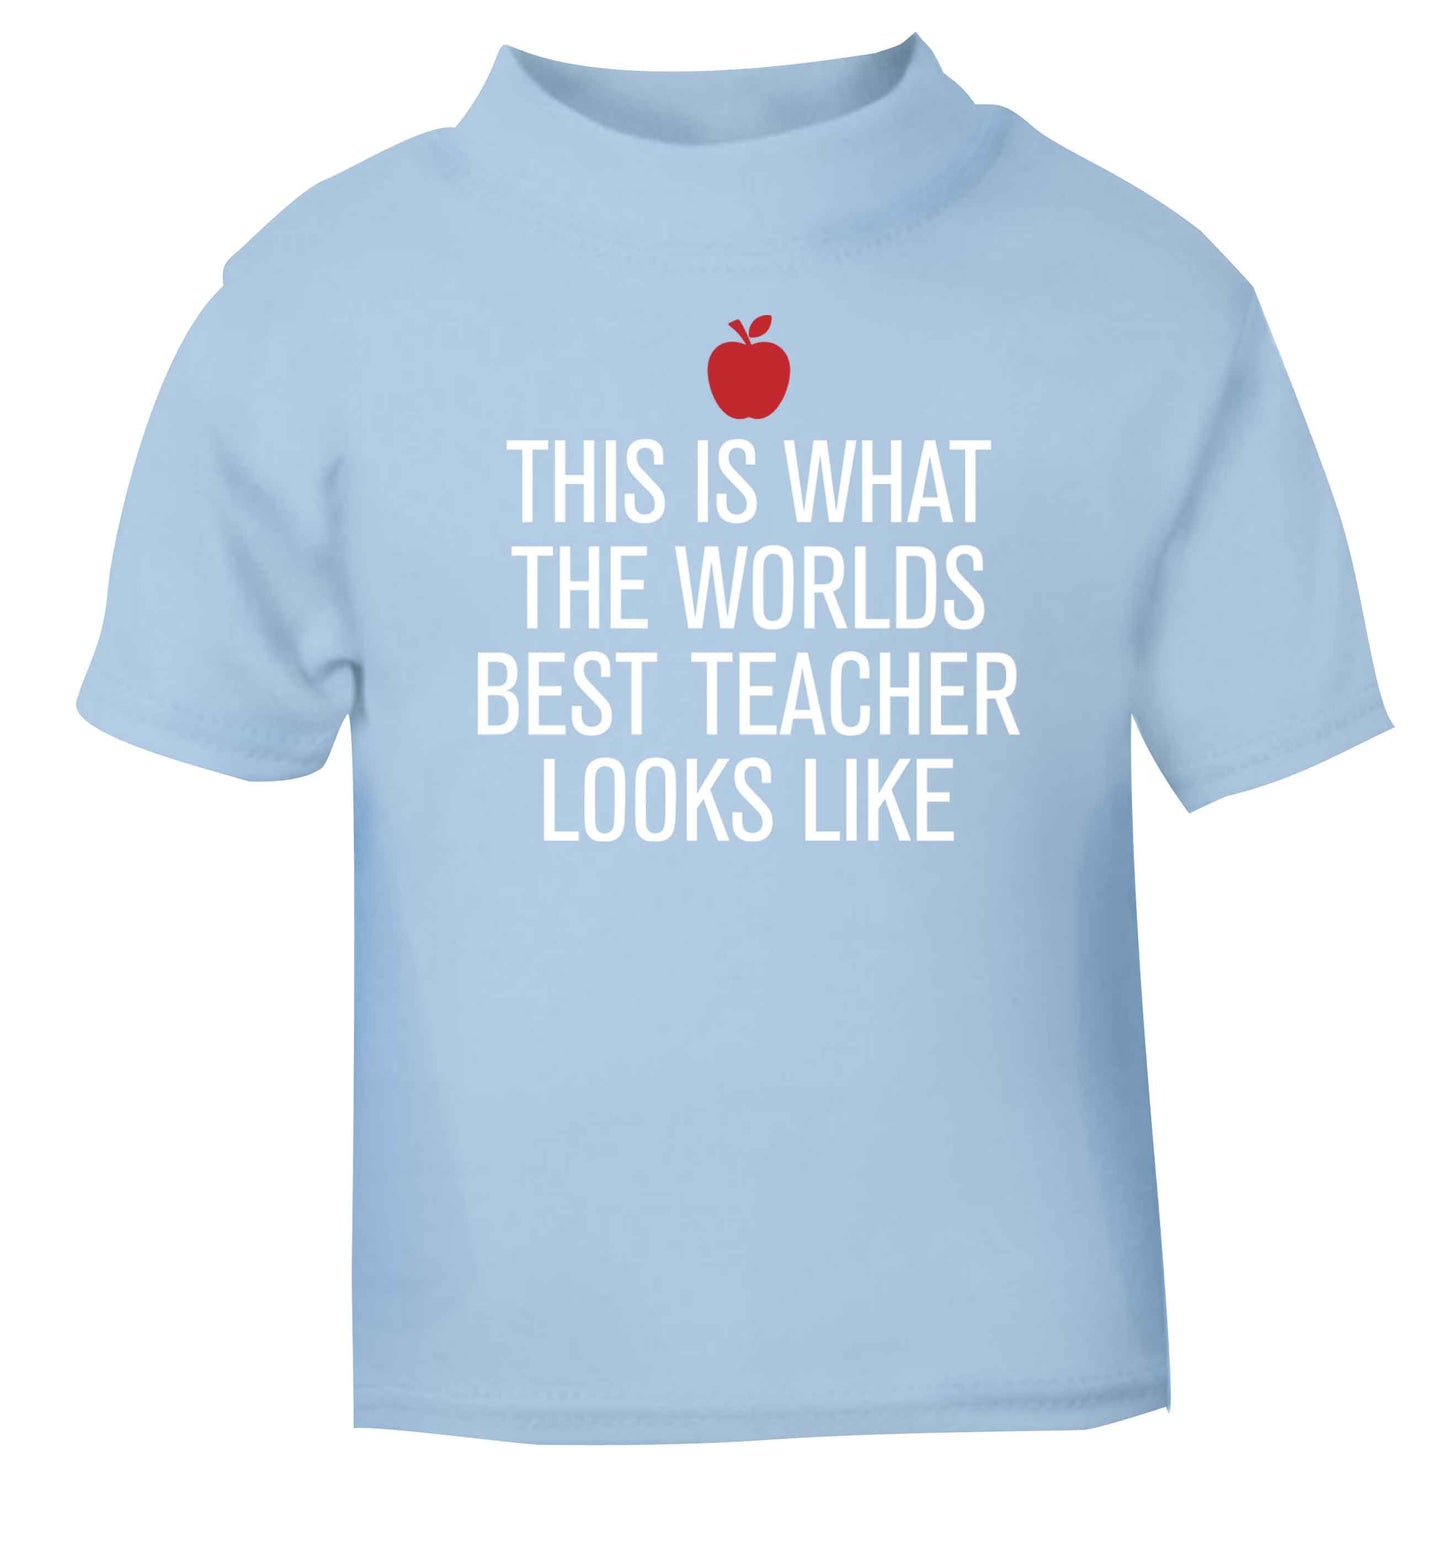 This is what the worlds best teacher looks like light blue baby toddler Tshirt 2 Years